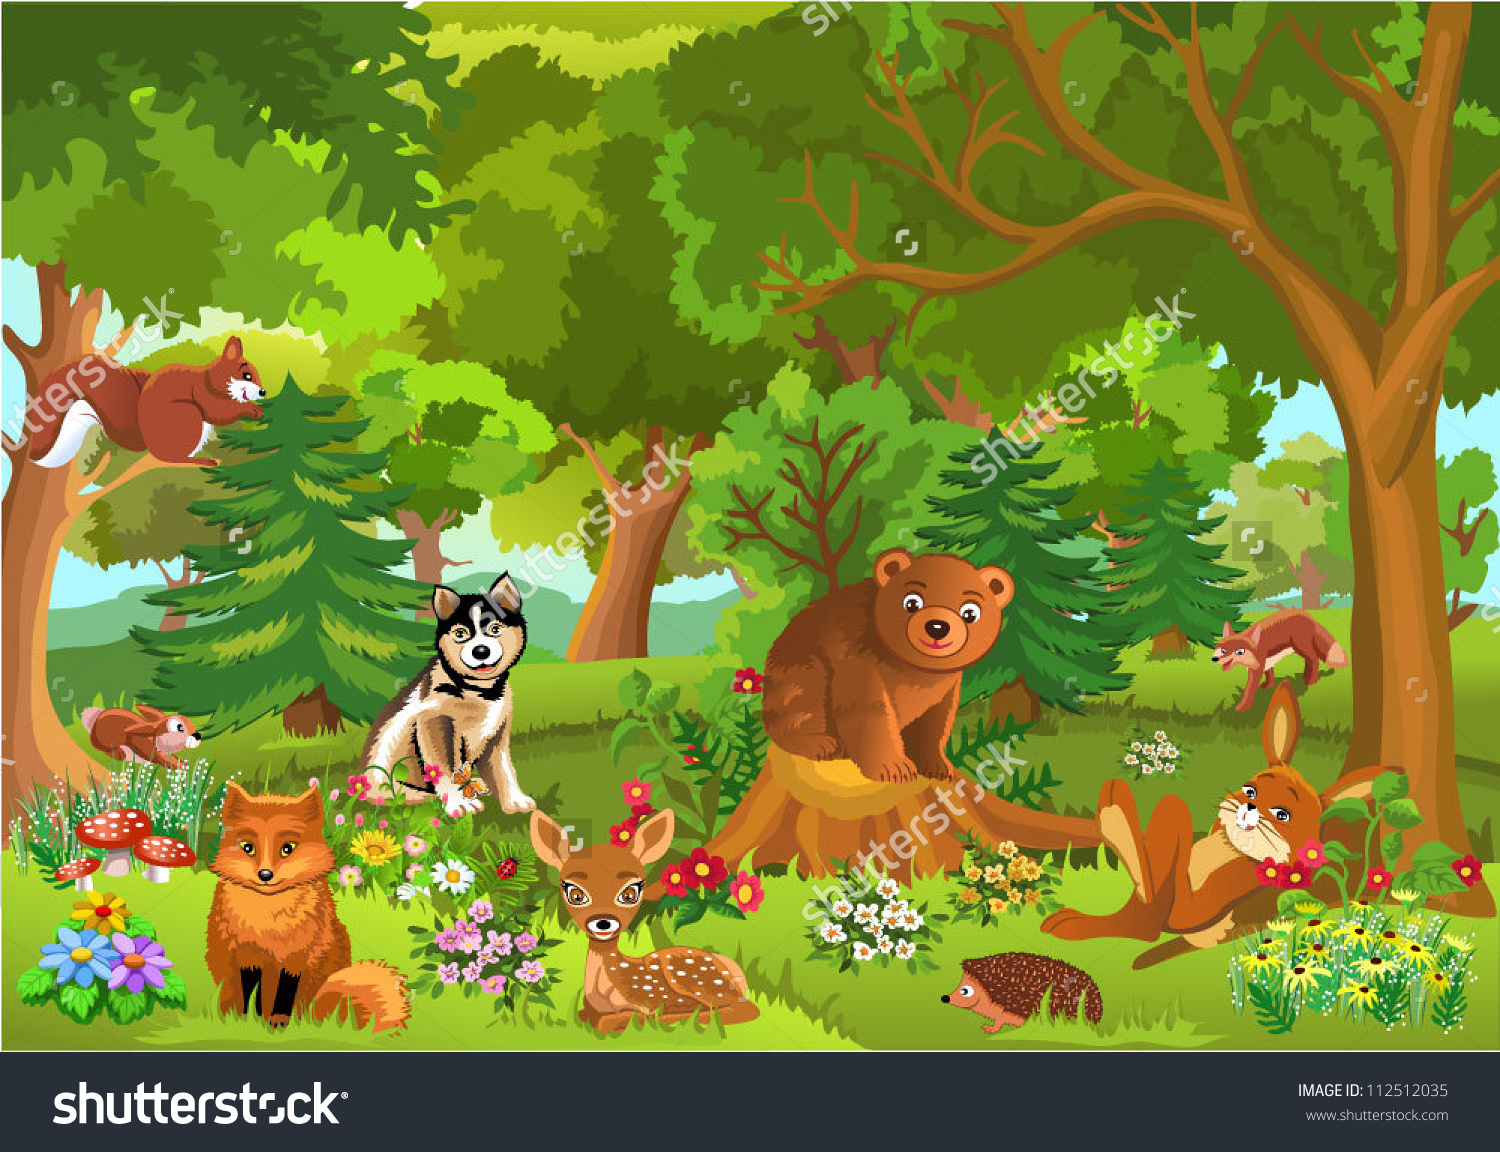 Cute Forest Clipart.